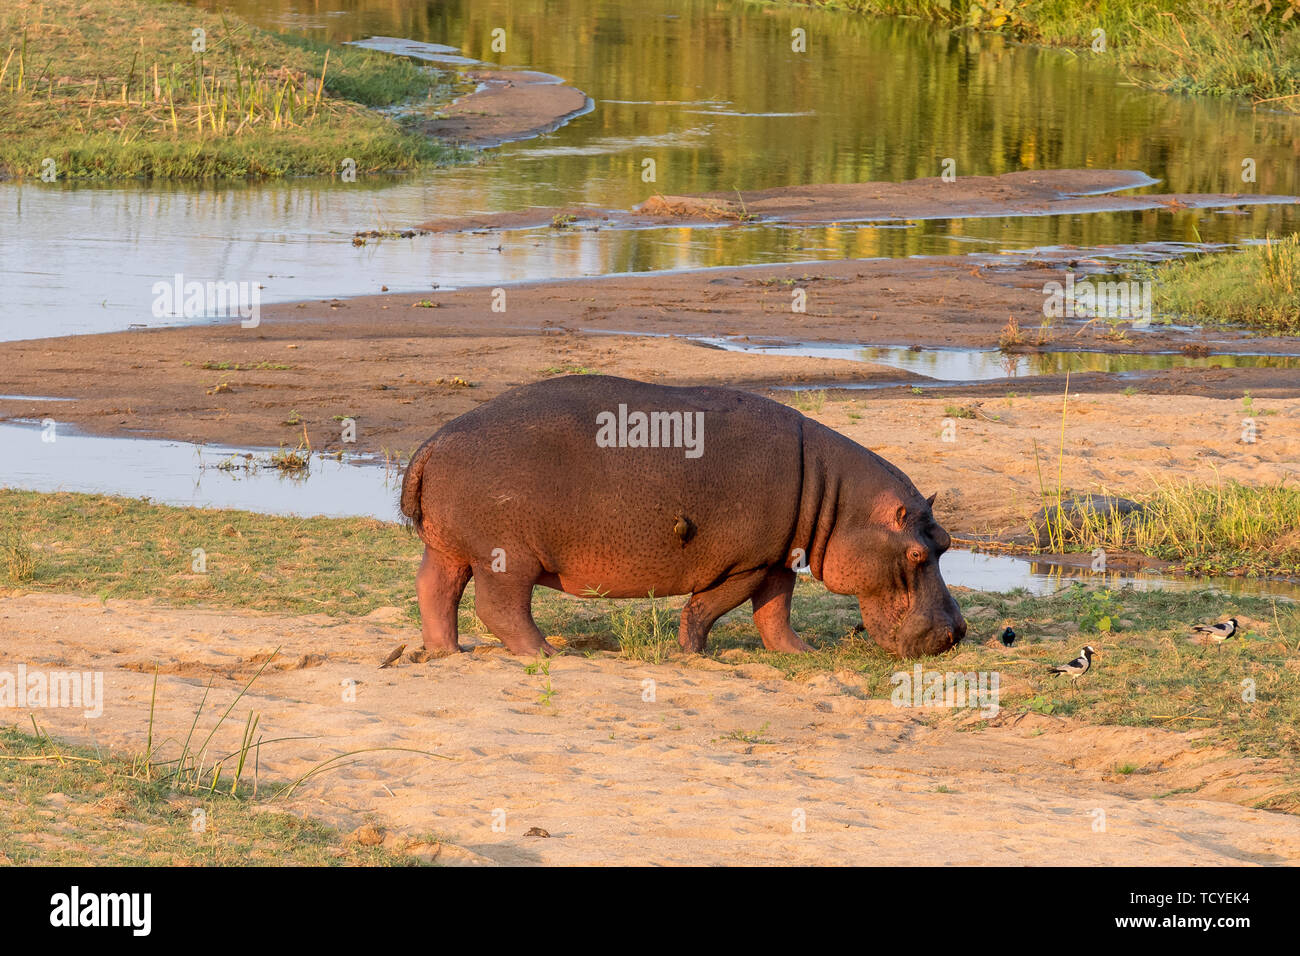 A hippopotamus grazing next to the Letaba River in the Limpopo Province of South Africa. An oxpecker and blacksmith plovers are visible Stock Photo